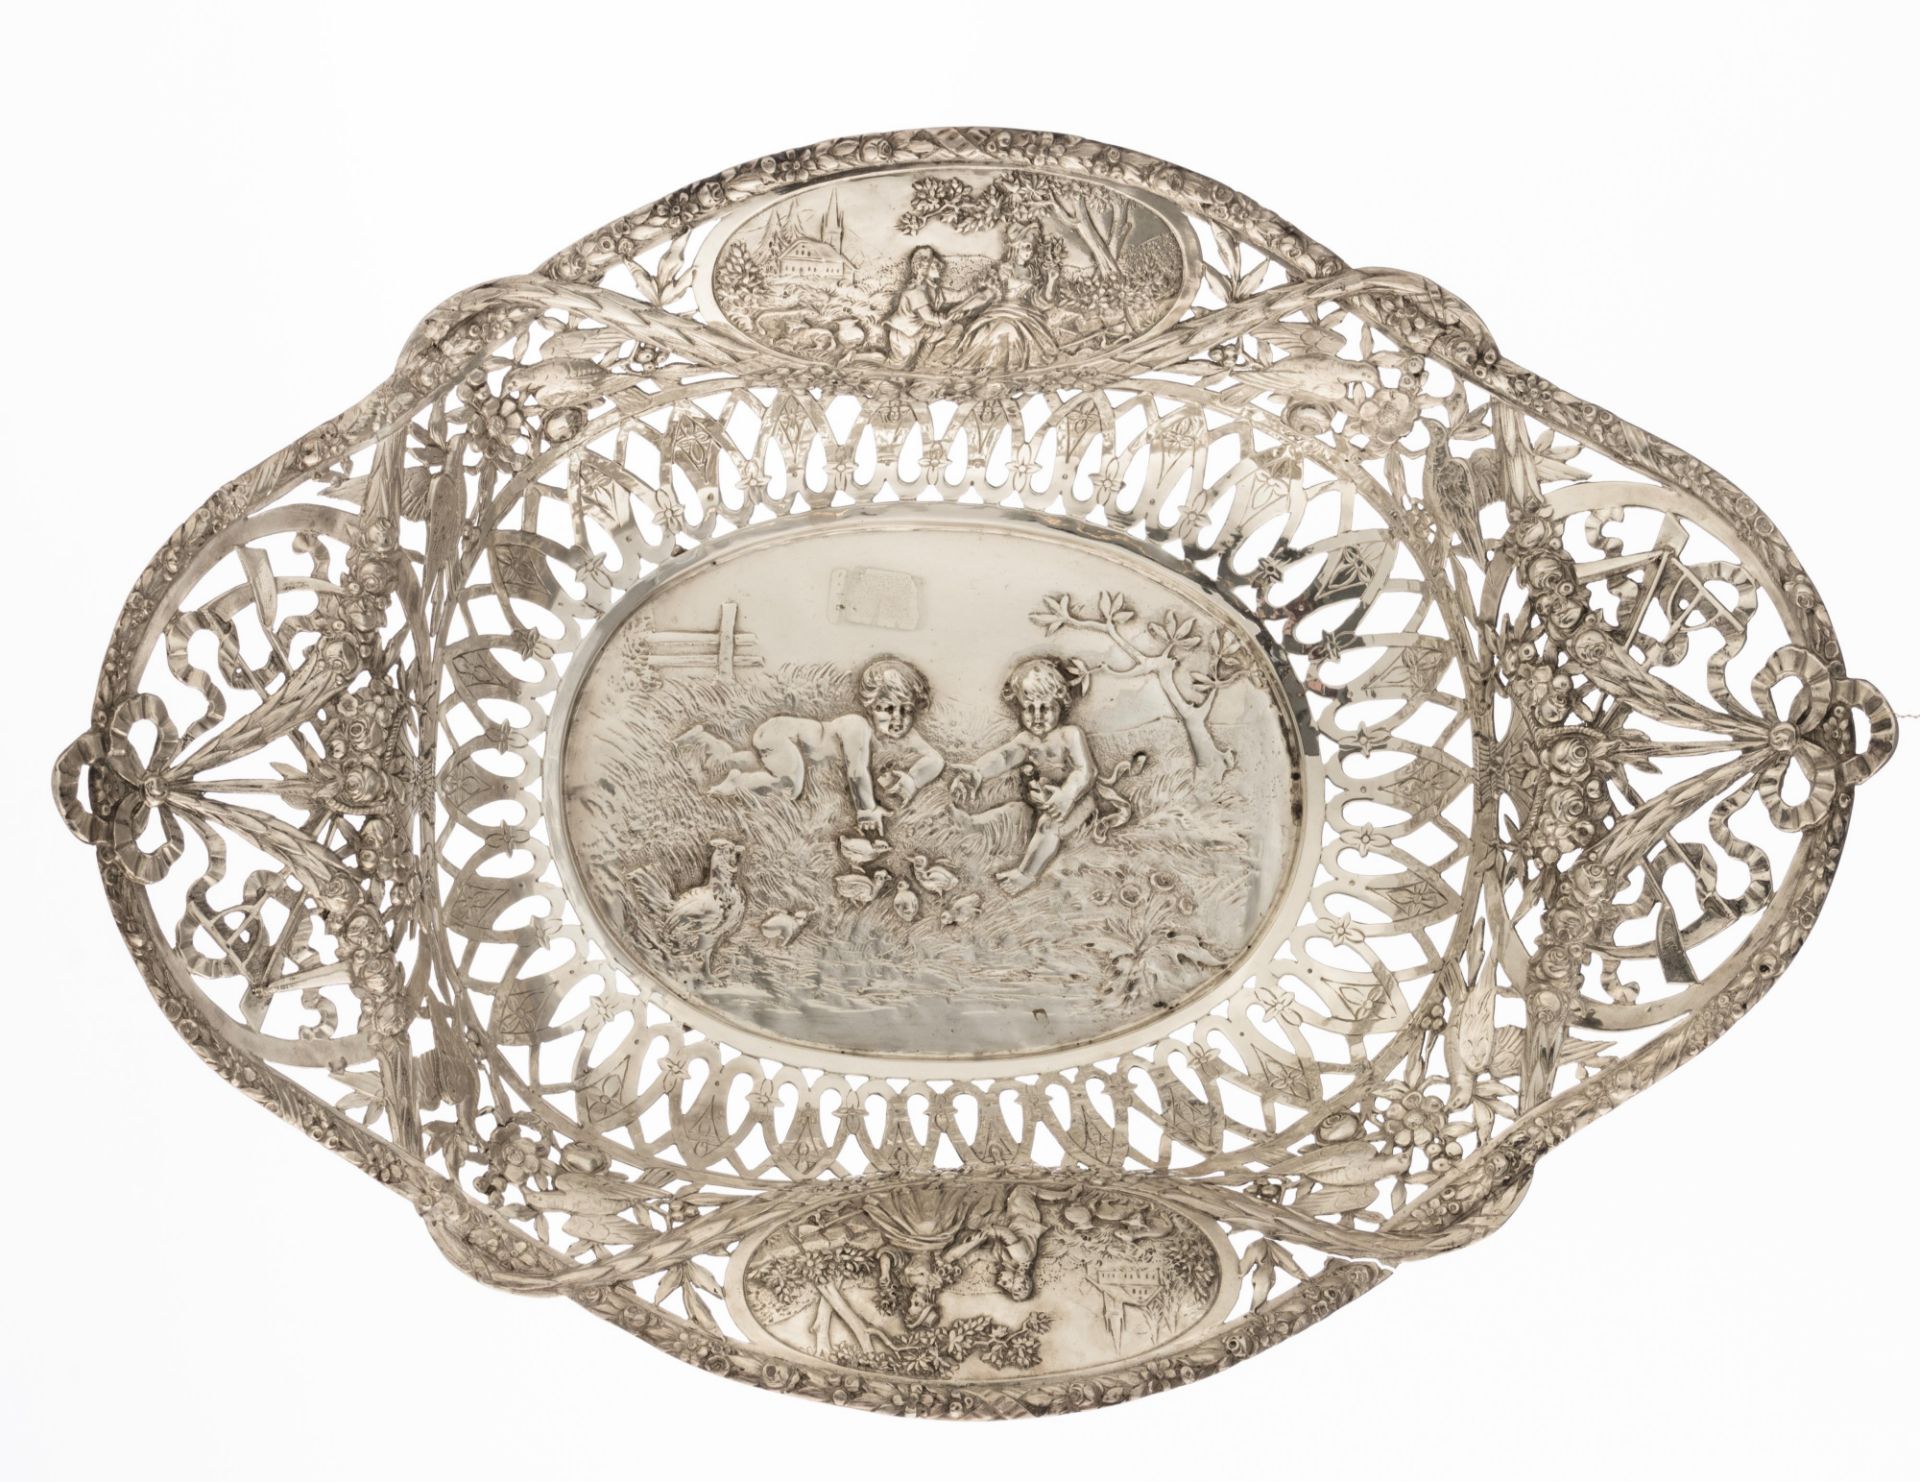 A collection of three silver chargers with ornate repousse pierced work, the well depicting playing - Bild 4 aus 12